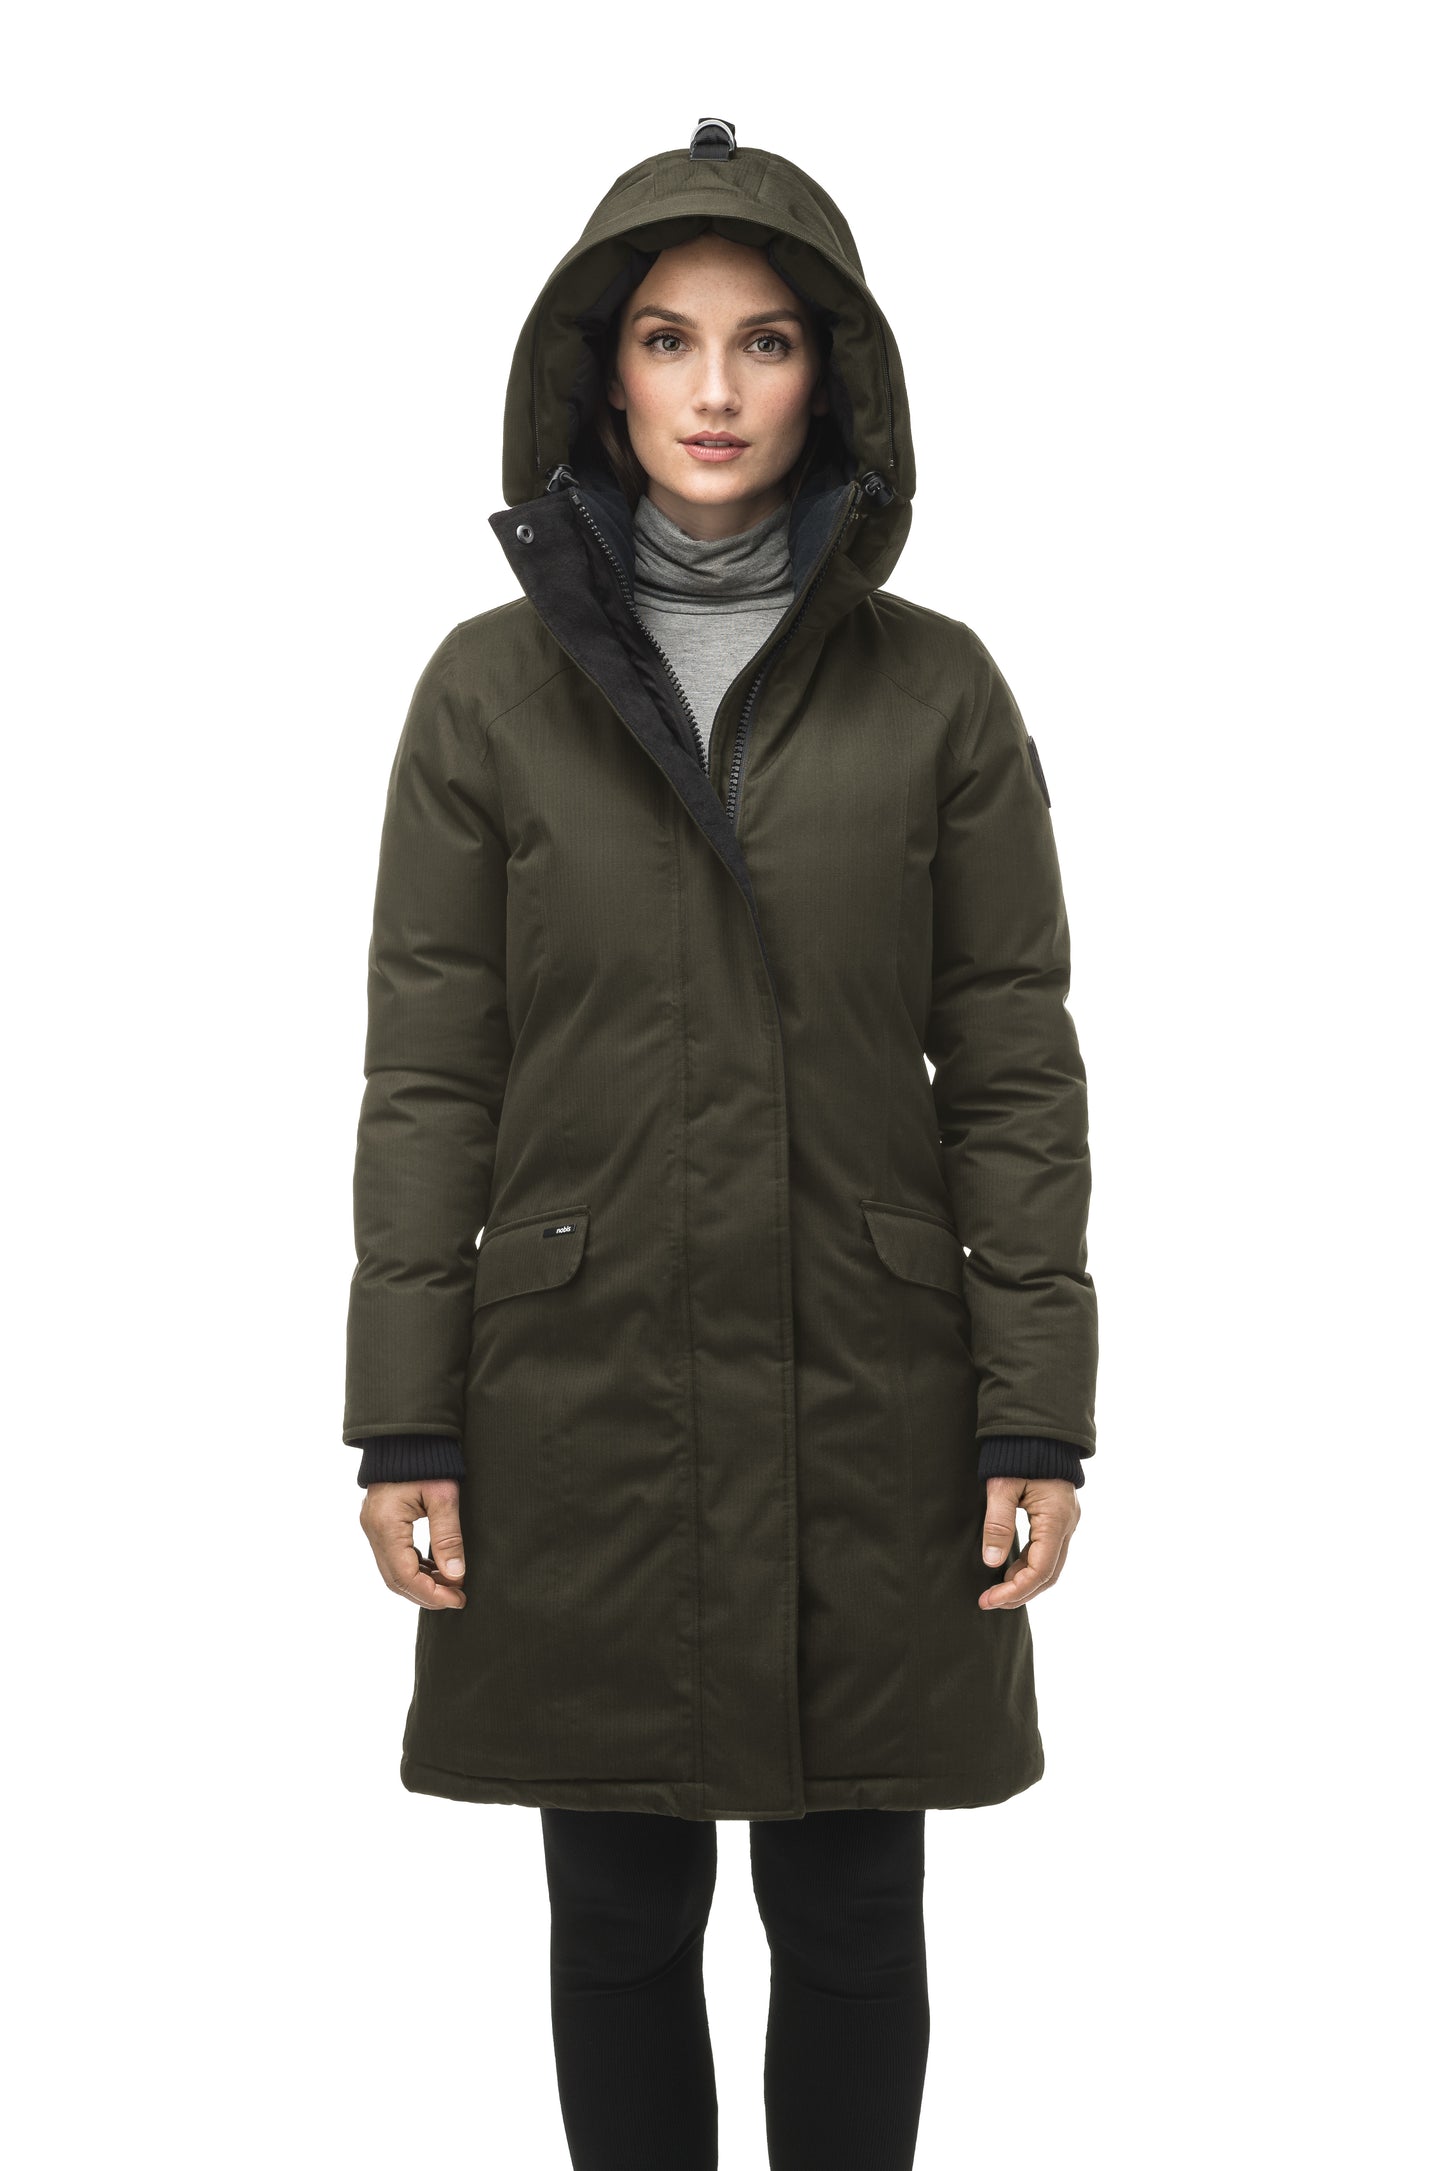 Rebecca Women's Parka in knee length, Canadian duck down insulation, two-way zipper with magnetic front placket, non-removable hood with removable coyote fur trim, in Fatigue